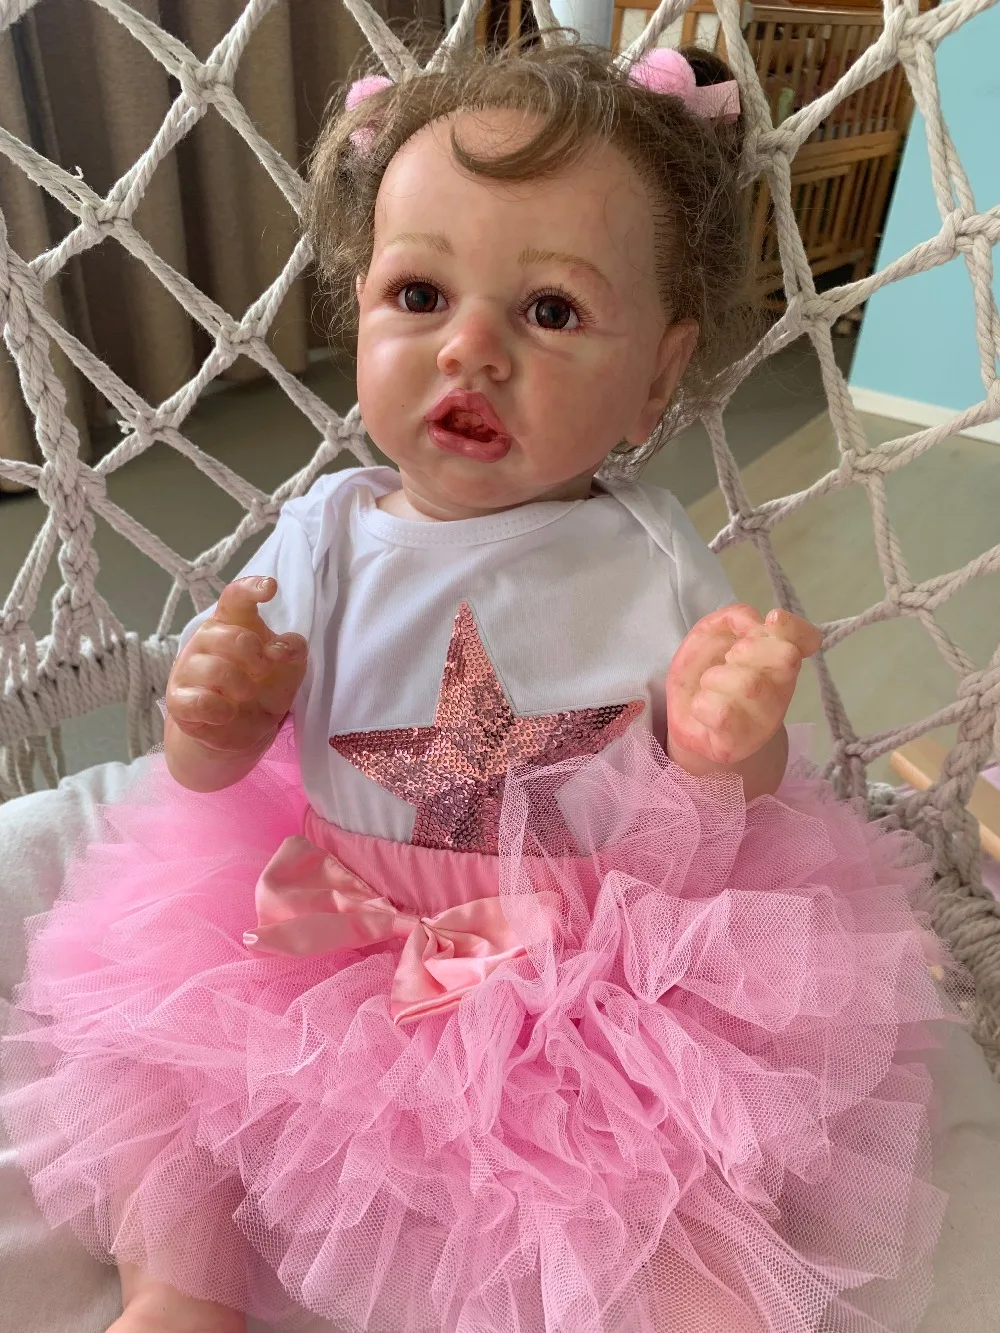 

55CM Cute Reborn Baby Boneca Full Silicone Handmade Crooked Mouth bebe reborn Doll Lifelike Babies Toy For Kid Birthday Gifts